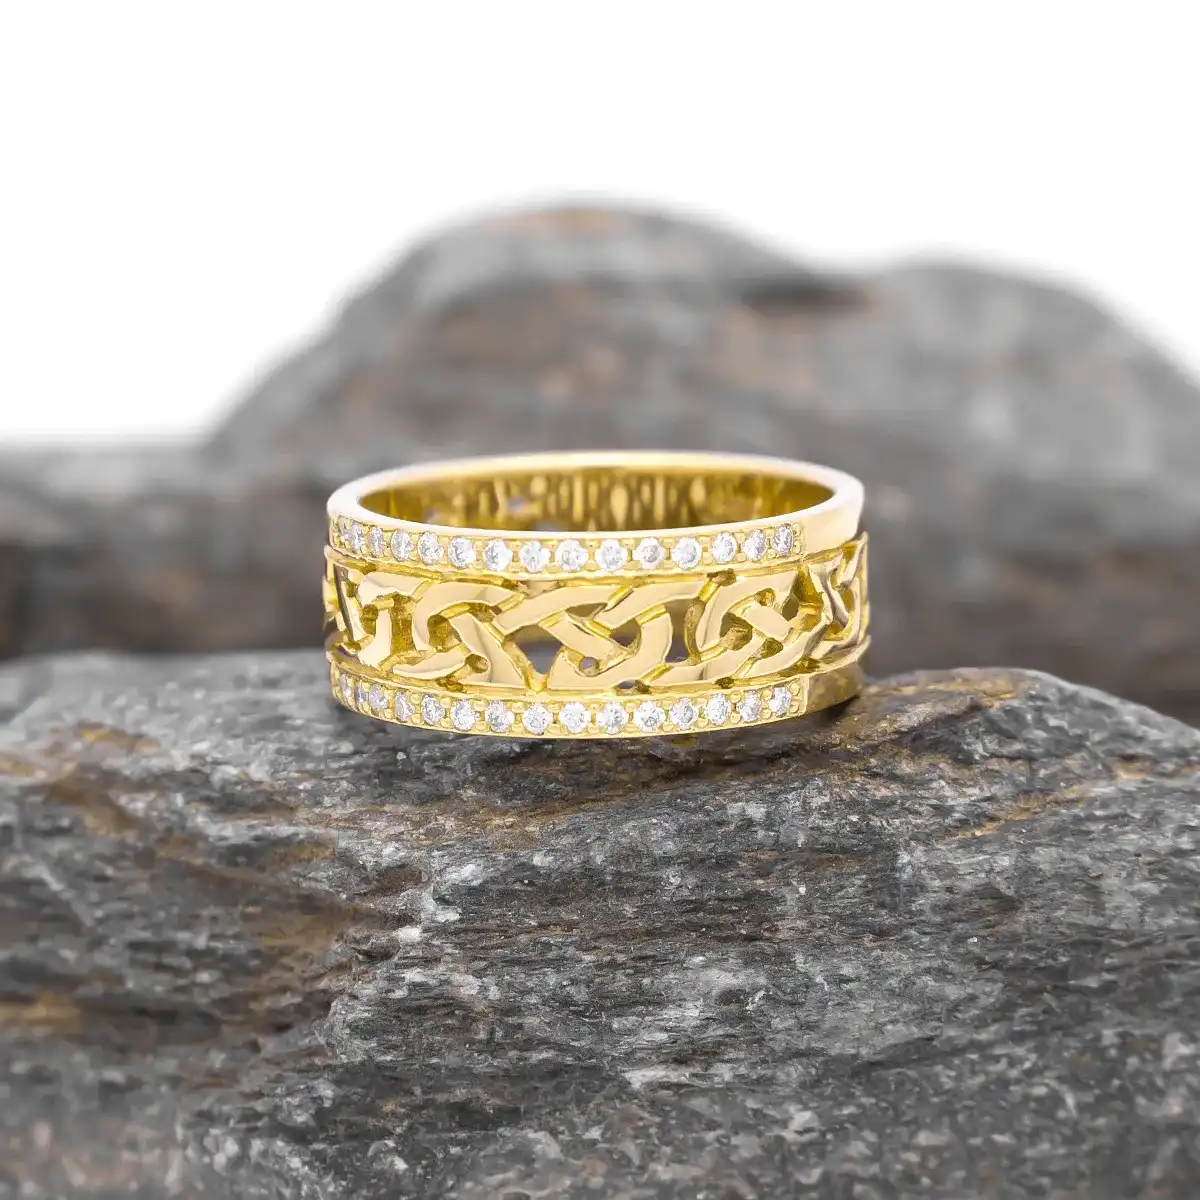 Interweaving Celtic Knot Ring With Double Row Diamonds...